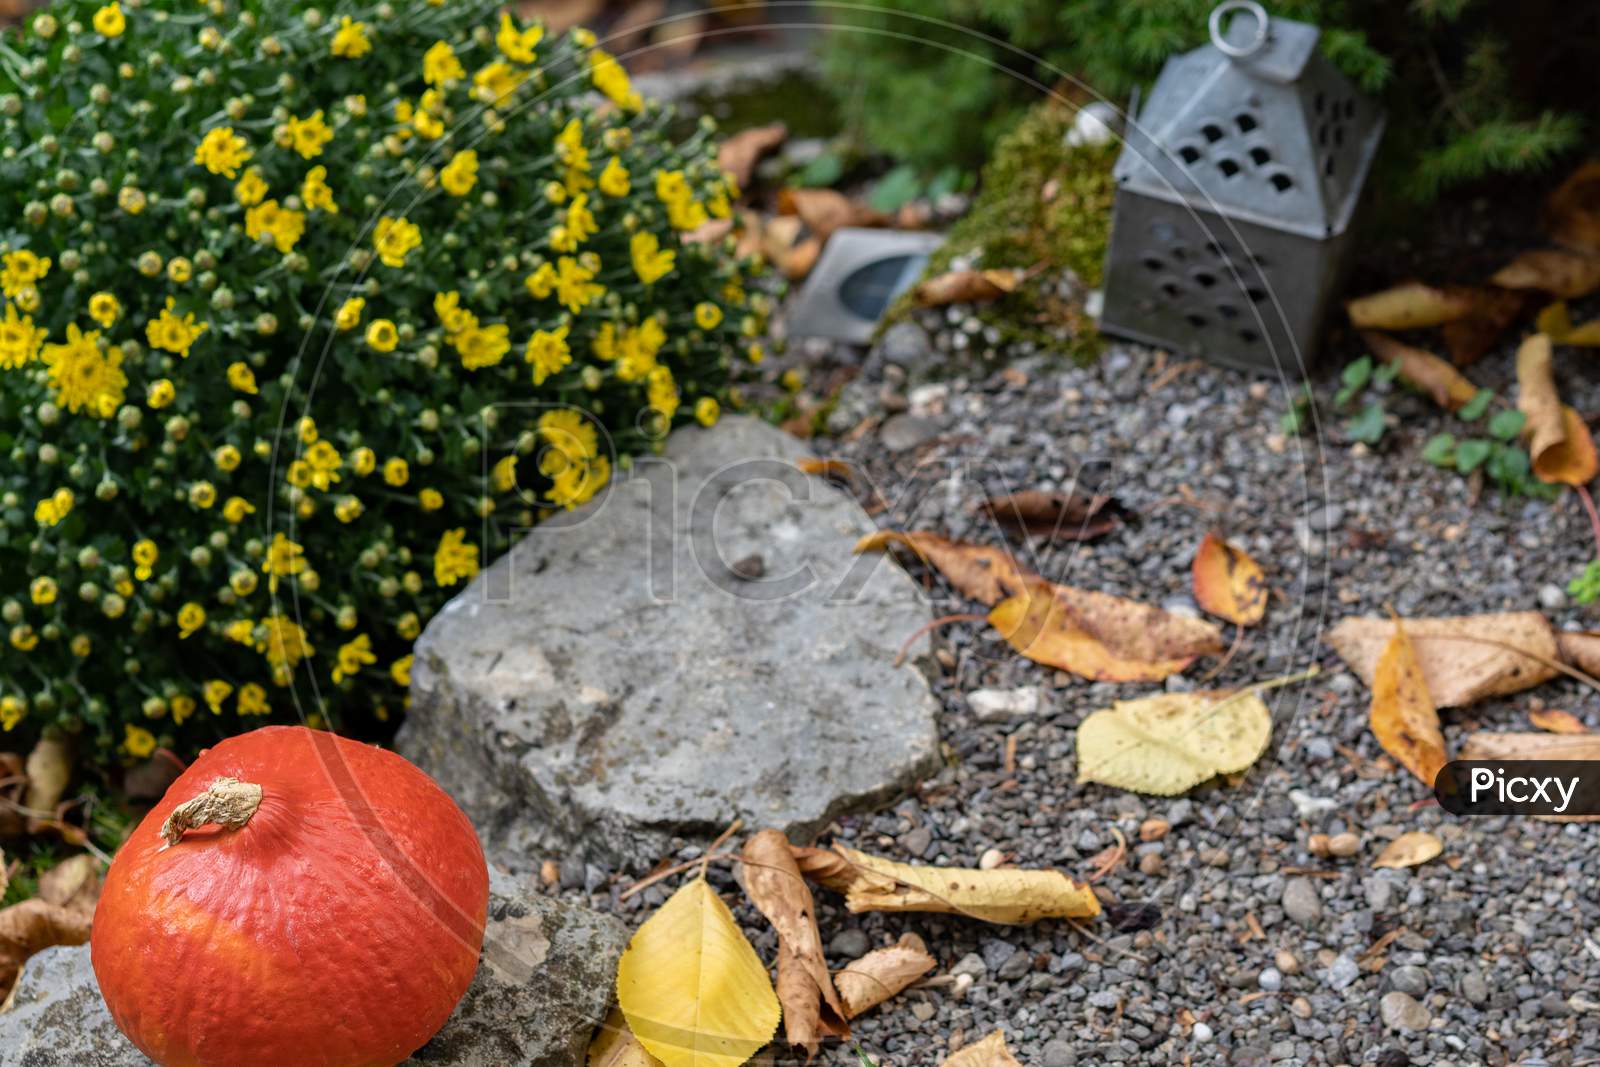 Orange Pumpkin On Gravel With Rustic Yellow Flower Bouquet And Autumn Leafs And Tin Lantern In Background.